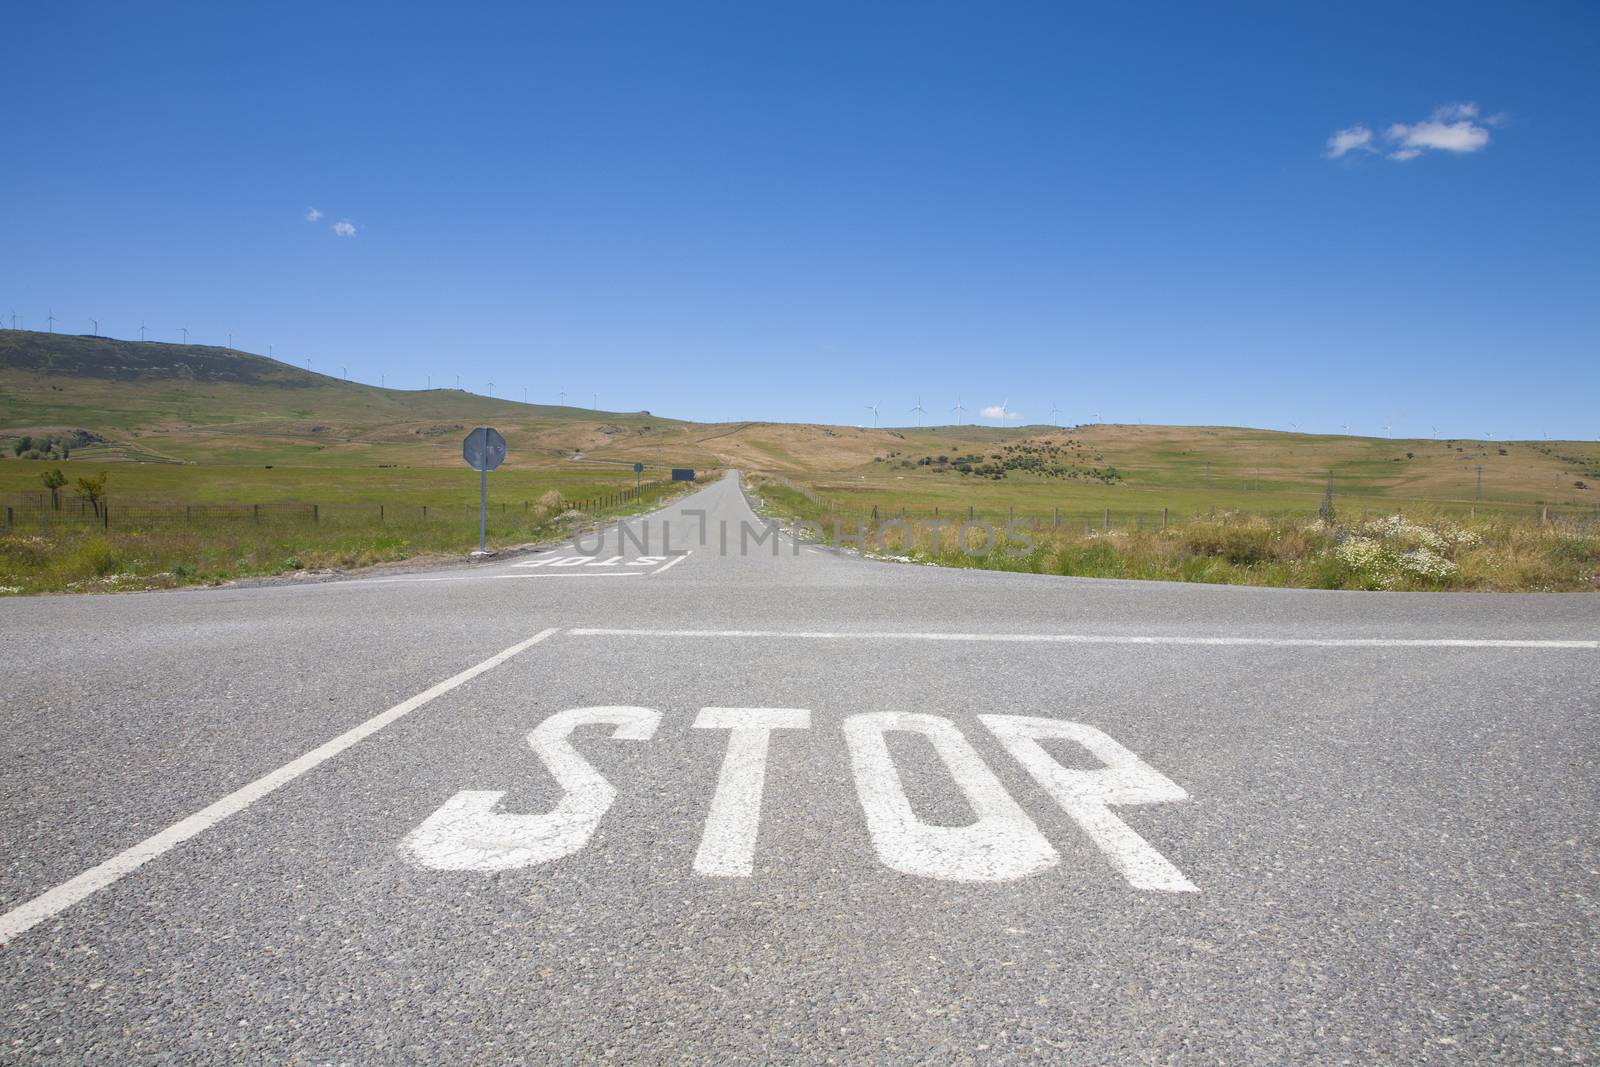 crossroad with stop symbol white painted on asphalt in rural road next to Madrid Spain Europe